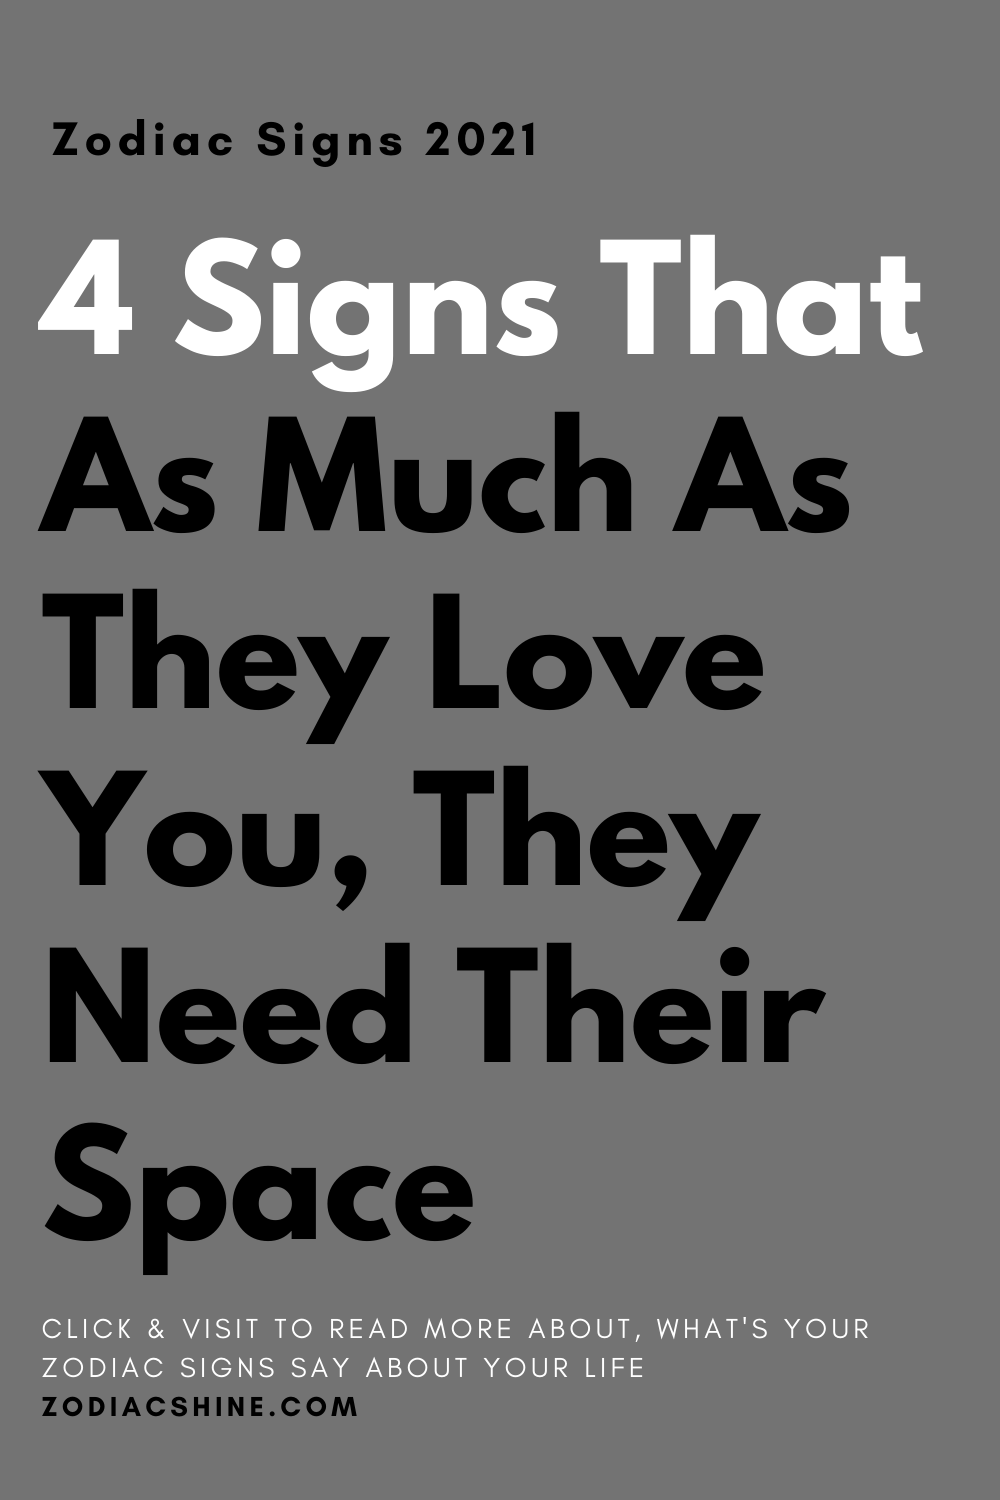 4 Signs That As Much As They Love You, They Need Their Space